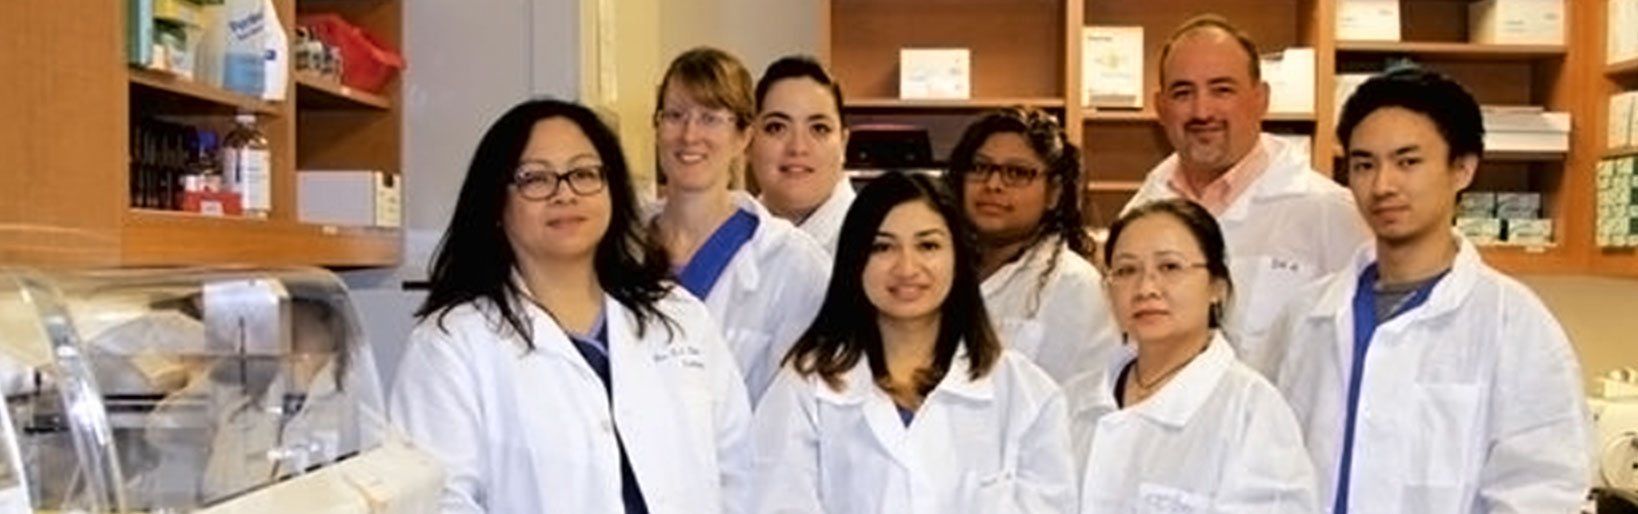 Houston Metro Urology's team of clinical scientists